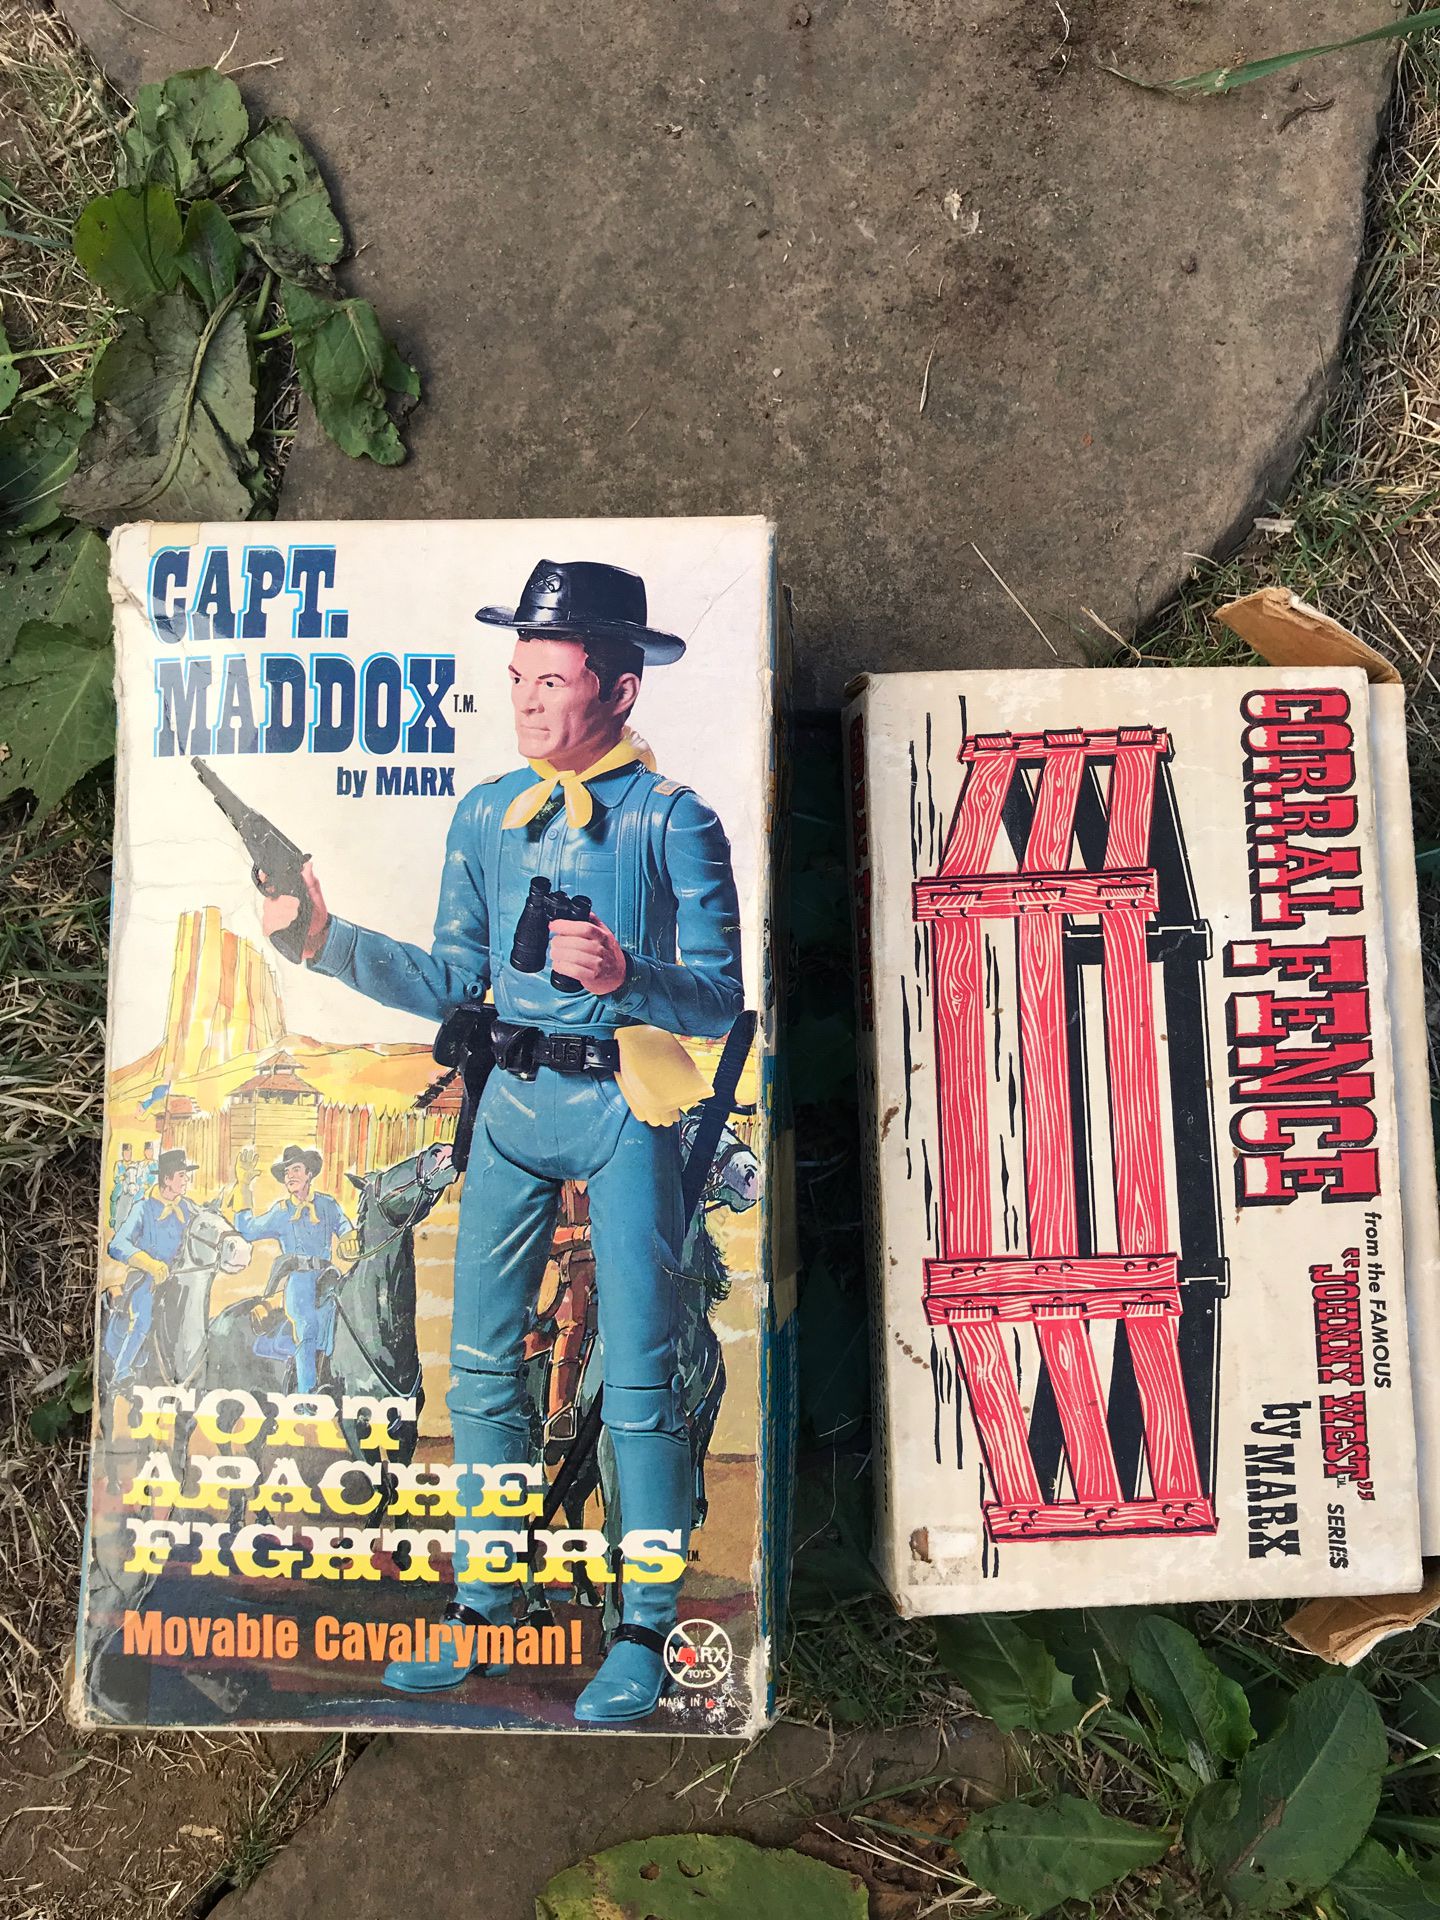 Fort Apache figures captain Mattix by Marks toy company